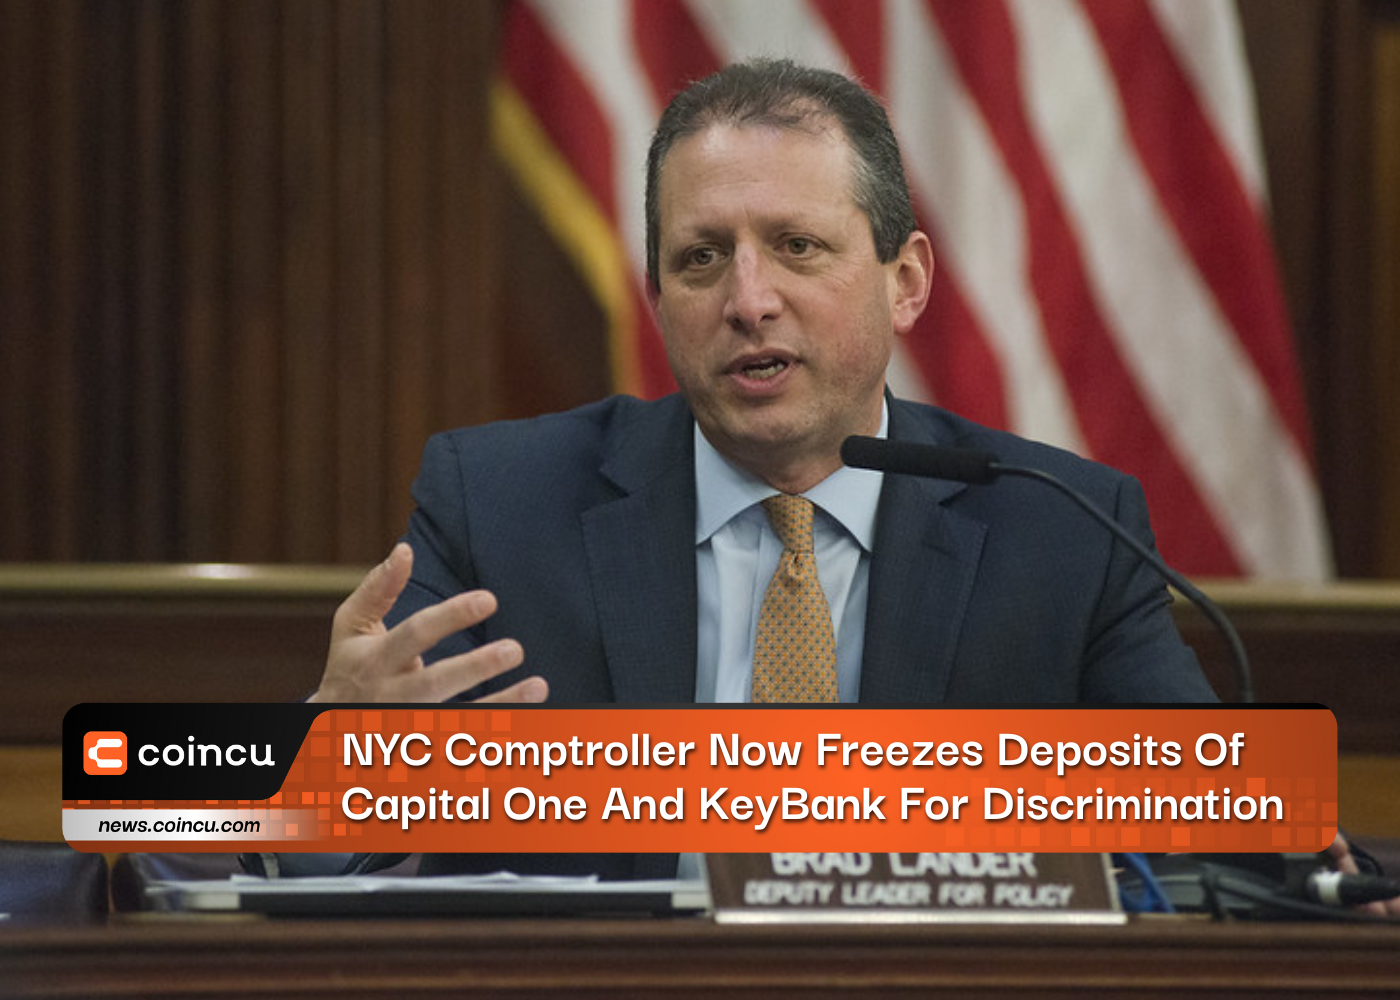 NYC Comptroller Now Freezes Deposits Of Capital One And KeyBank For Discrimination